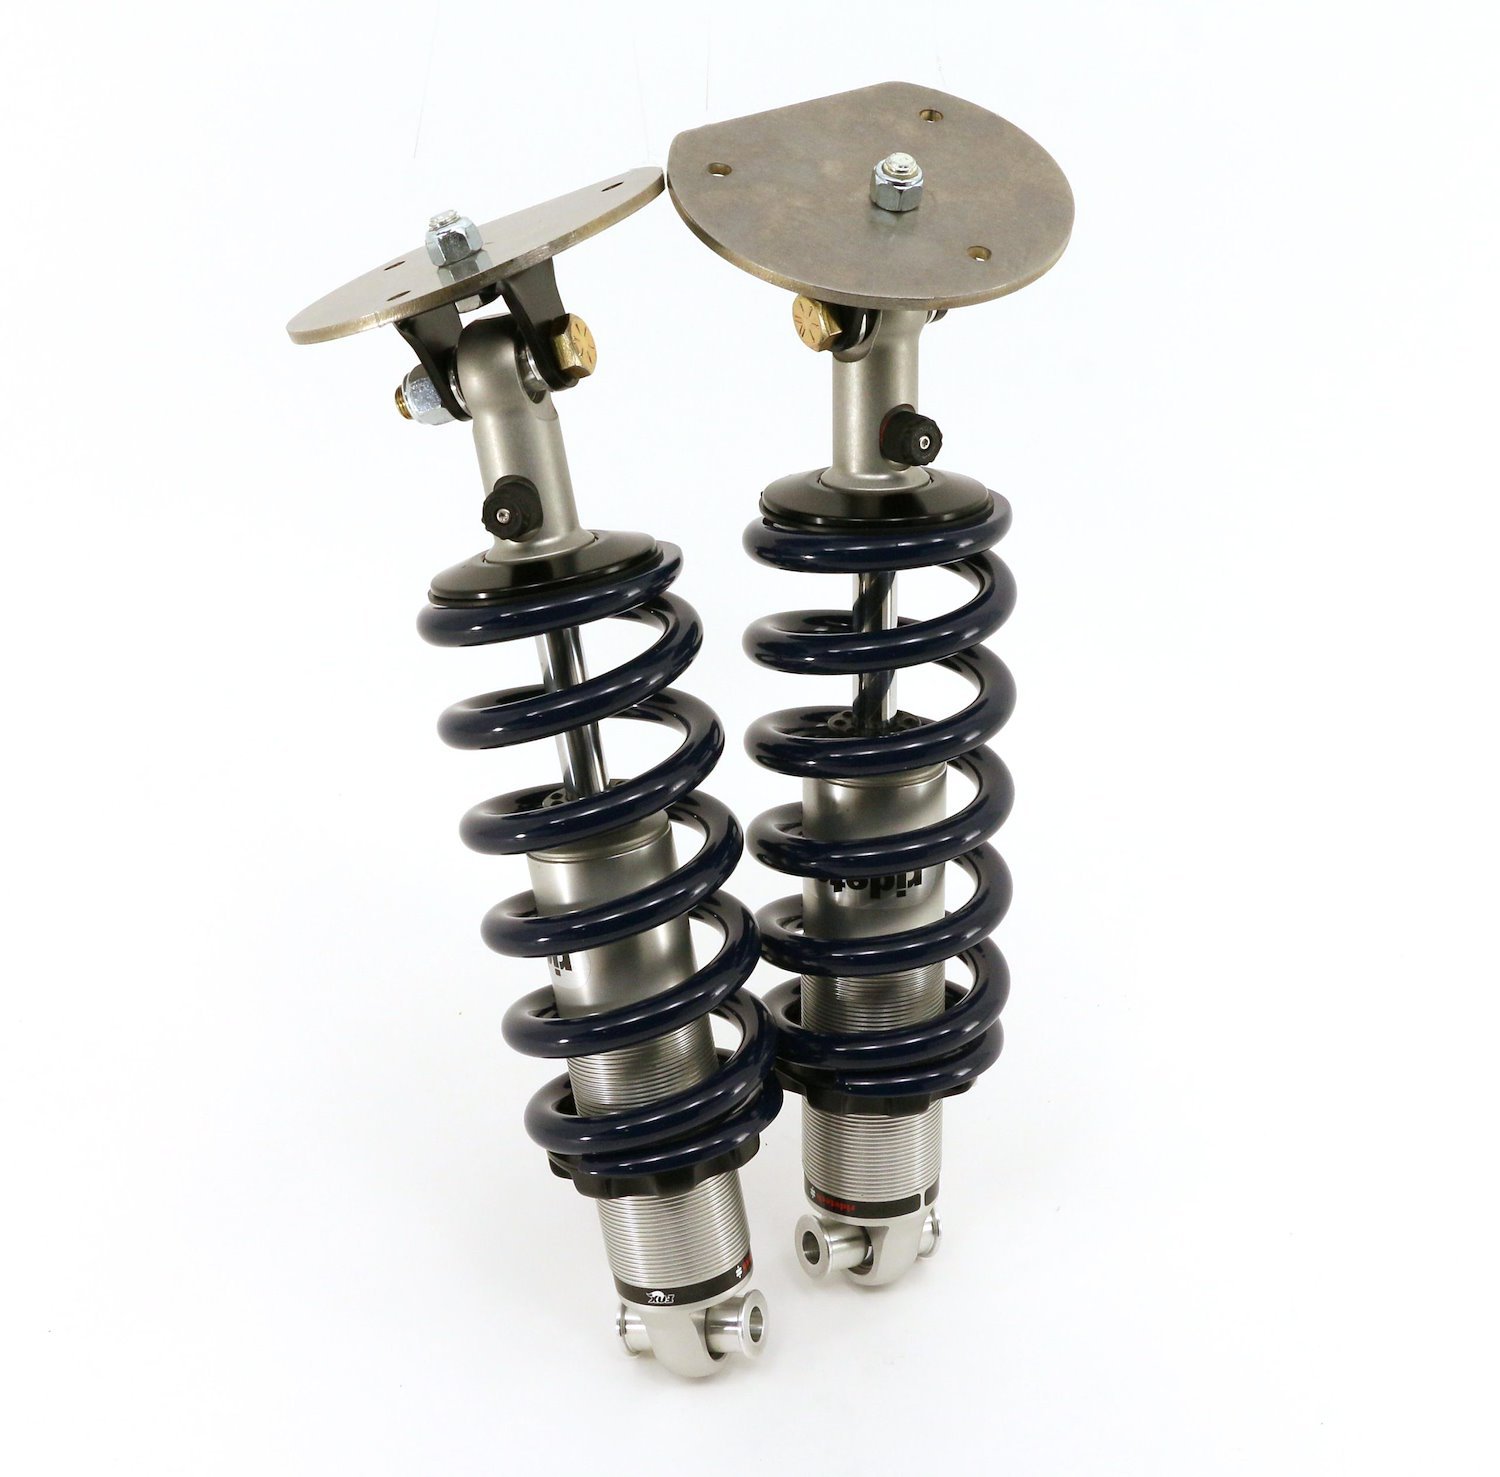 TQ Series Front CoilOvers for 03-07 Crown Vic Front Suspension. For use w/ Stock arms. Includes HQ S